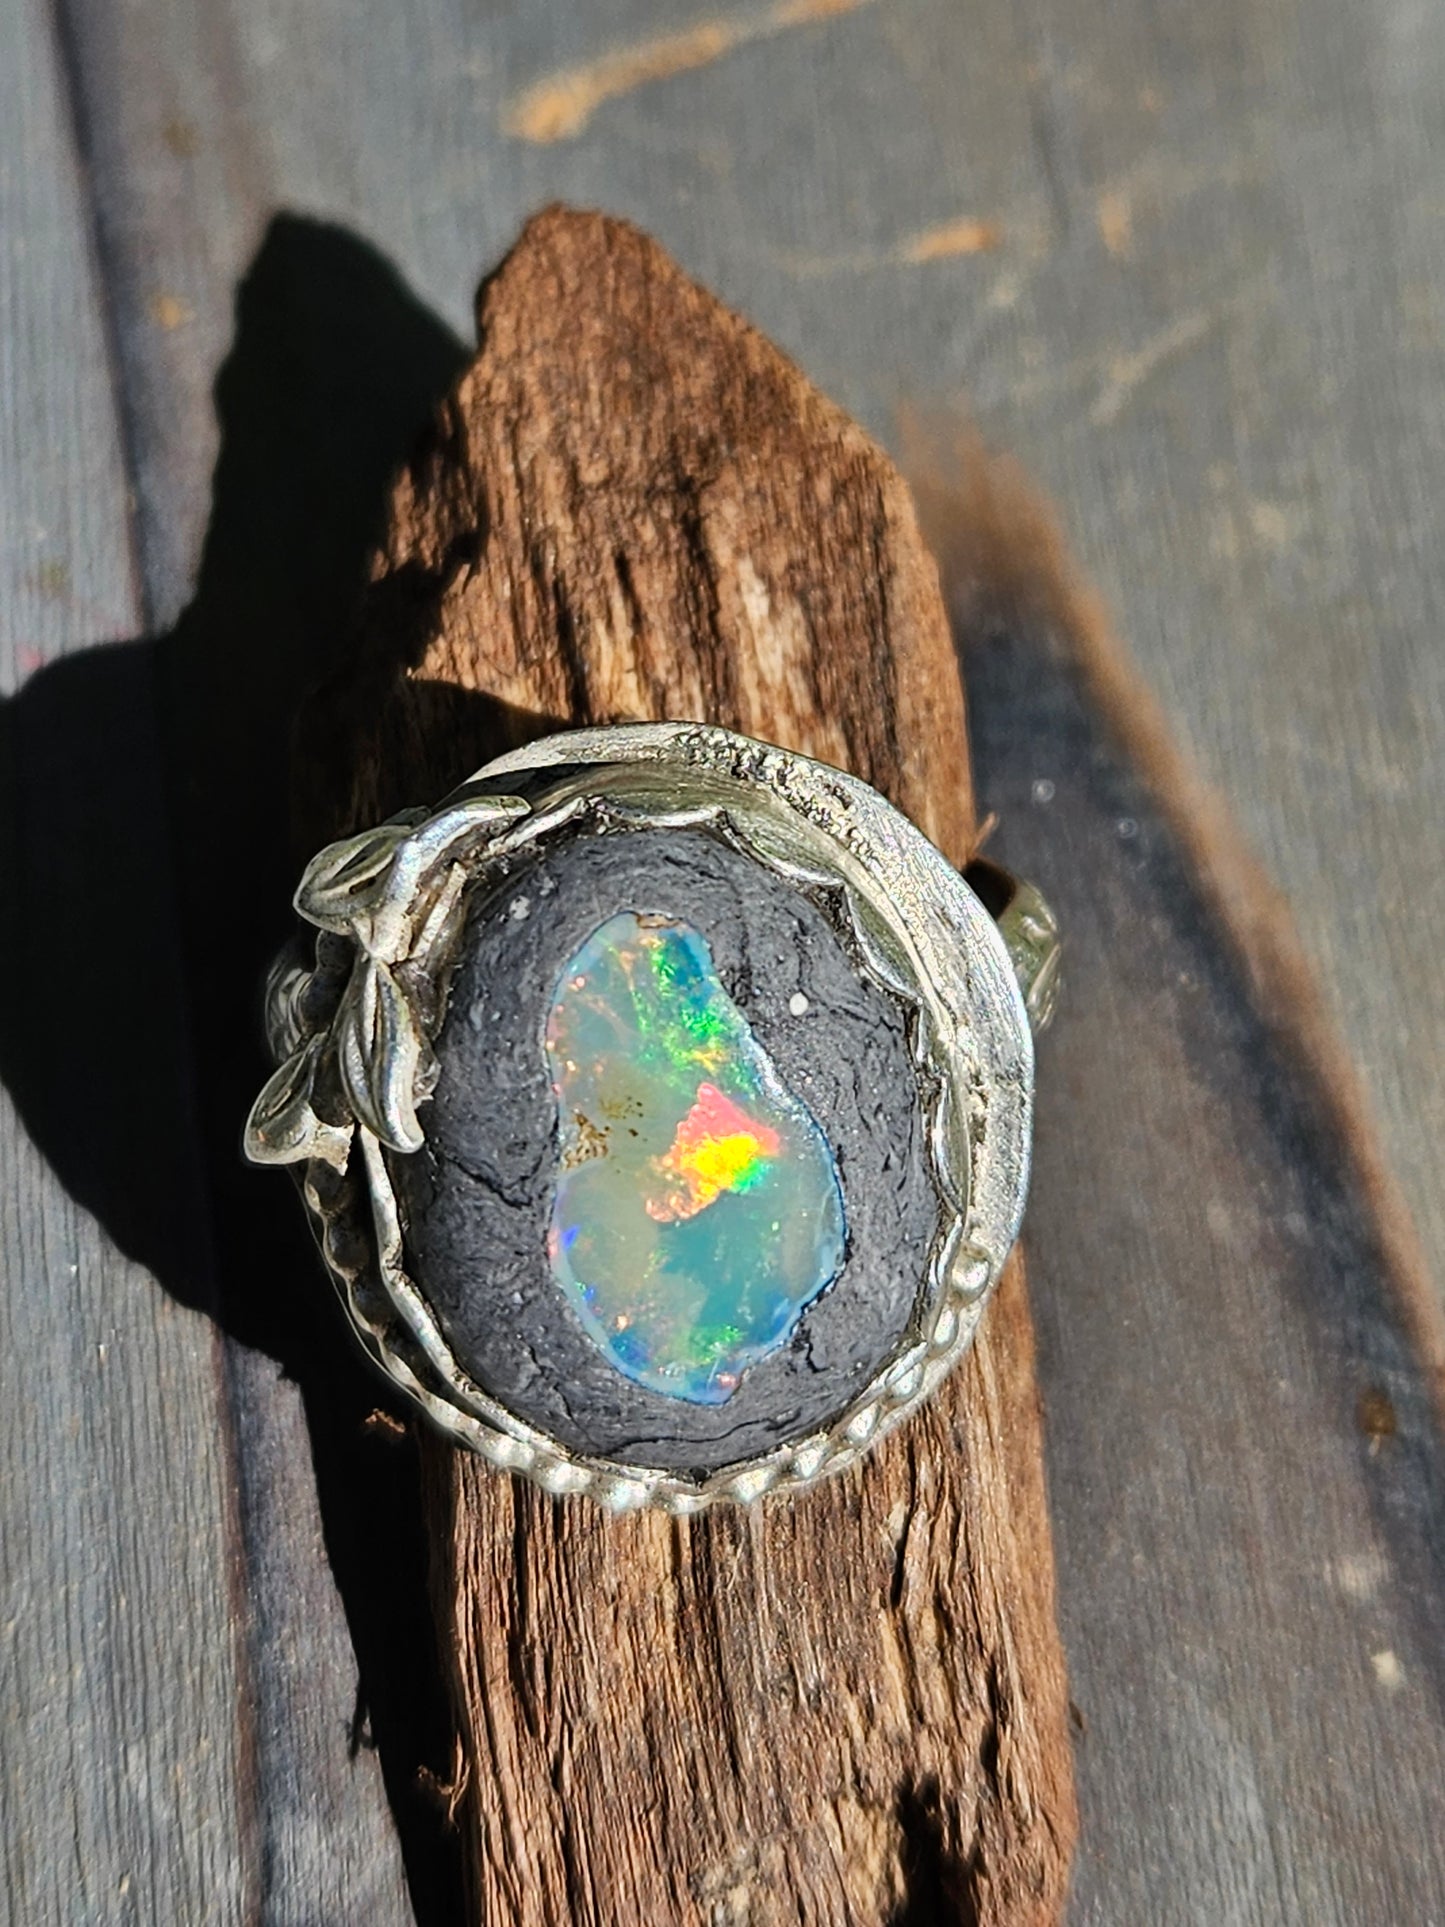 "Arkenstone" Mexican Opal Ring, size 10